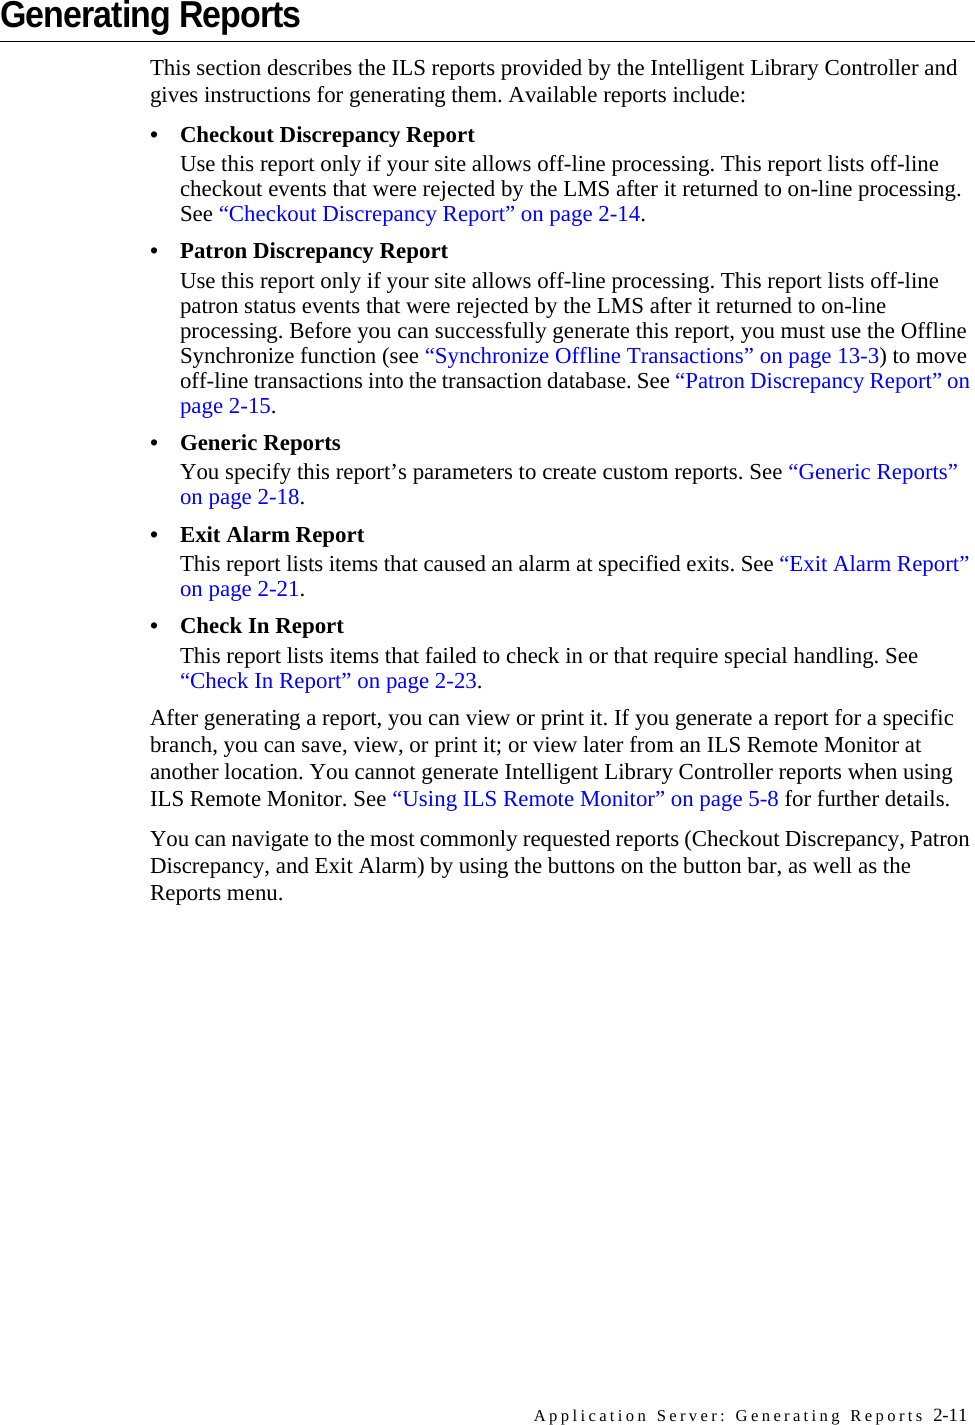 Application Server: Generating Reports 2-11Generating ReportsThis section describes the ILS reports provided by the Intelligent Library Controller and gives instructions for generating them. Available reports include:• Checkout Discrepancy ReportUse this report only if your site allows off-line processing. This report lists off-line checkout events that were rejected by the LMS after it returned to on-line processing. See “Checkout Discrepancy Report” on page 2-14.• Patron Discrepancy ReportUse this report only if your site allows off-line processing. This report lists off-line patron status events that were rejected by the LMS after it returned to on-line processing. Before you can successfully generate this report, you must use the Offline Synchronize function (see “Synchronize Offline Transactions” on page 13-3) to move off-line transactions into the transaction database. See “Patron Discrepancy Report” on page 2-15.• Generic ReportsYou specify this report’s parameters to create custom reports. See “Generic Reports” on page 2-18.• Exit Alarm ReportThis report lists items that caused an alarm at specified exits. See “Exit Alarm Report” on page 2-21.• Check In ReportThis report lists items that failed to check in or that require special handling. See “Check In Report” on page 2-23.After generating a report, you can view or print it. If you generate a report for a specific branch, you can save, view, or print it; or view later from an ILS Remote Monitor at another location. You cannot generate Intelligent Library Controller reports when using ILS Remote Monitor. See “Using ILS Remote Monitor” on page 5-8 for further details.You can navigate to the most commonly requested reports (Checkout Discrepancy, Patron Discrepancy, and Exit Alarm) by using the buttons on the button bar, as well as the Reports menu.